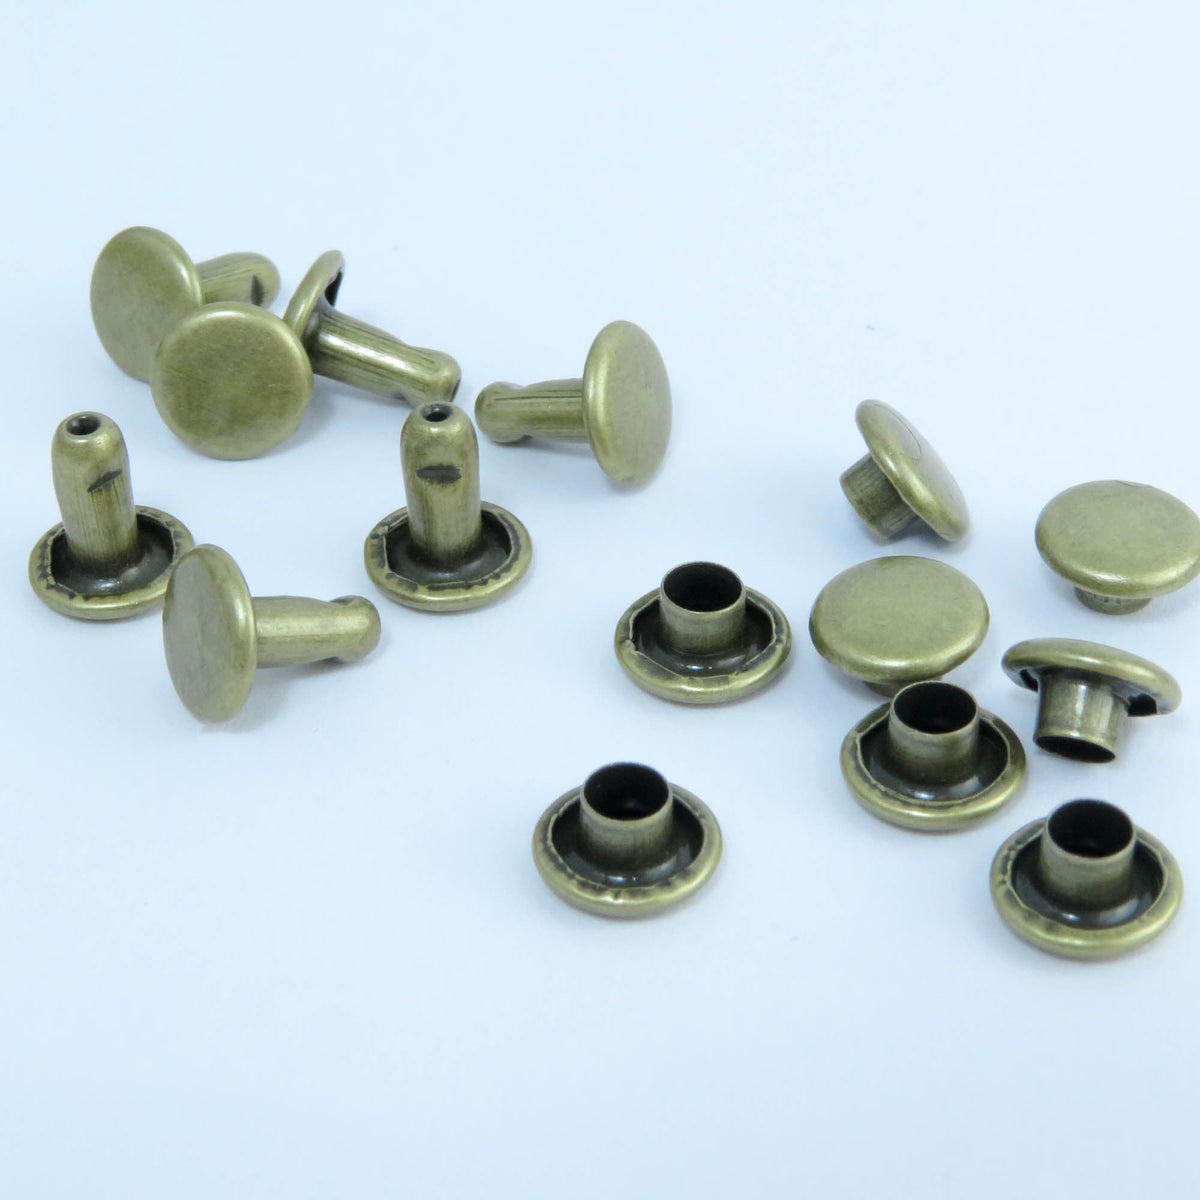 7 MM DOUBLE CAP RIVETS FOR LEATHER AND CRAFTS ATIQUE BRASS/NICKEL/BRASS/BLACK NICKEL AVAILABLE